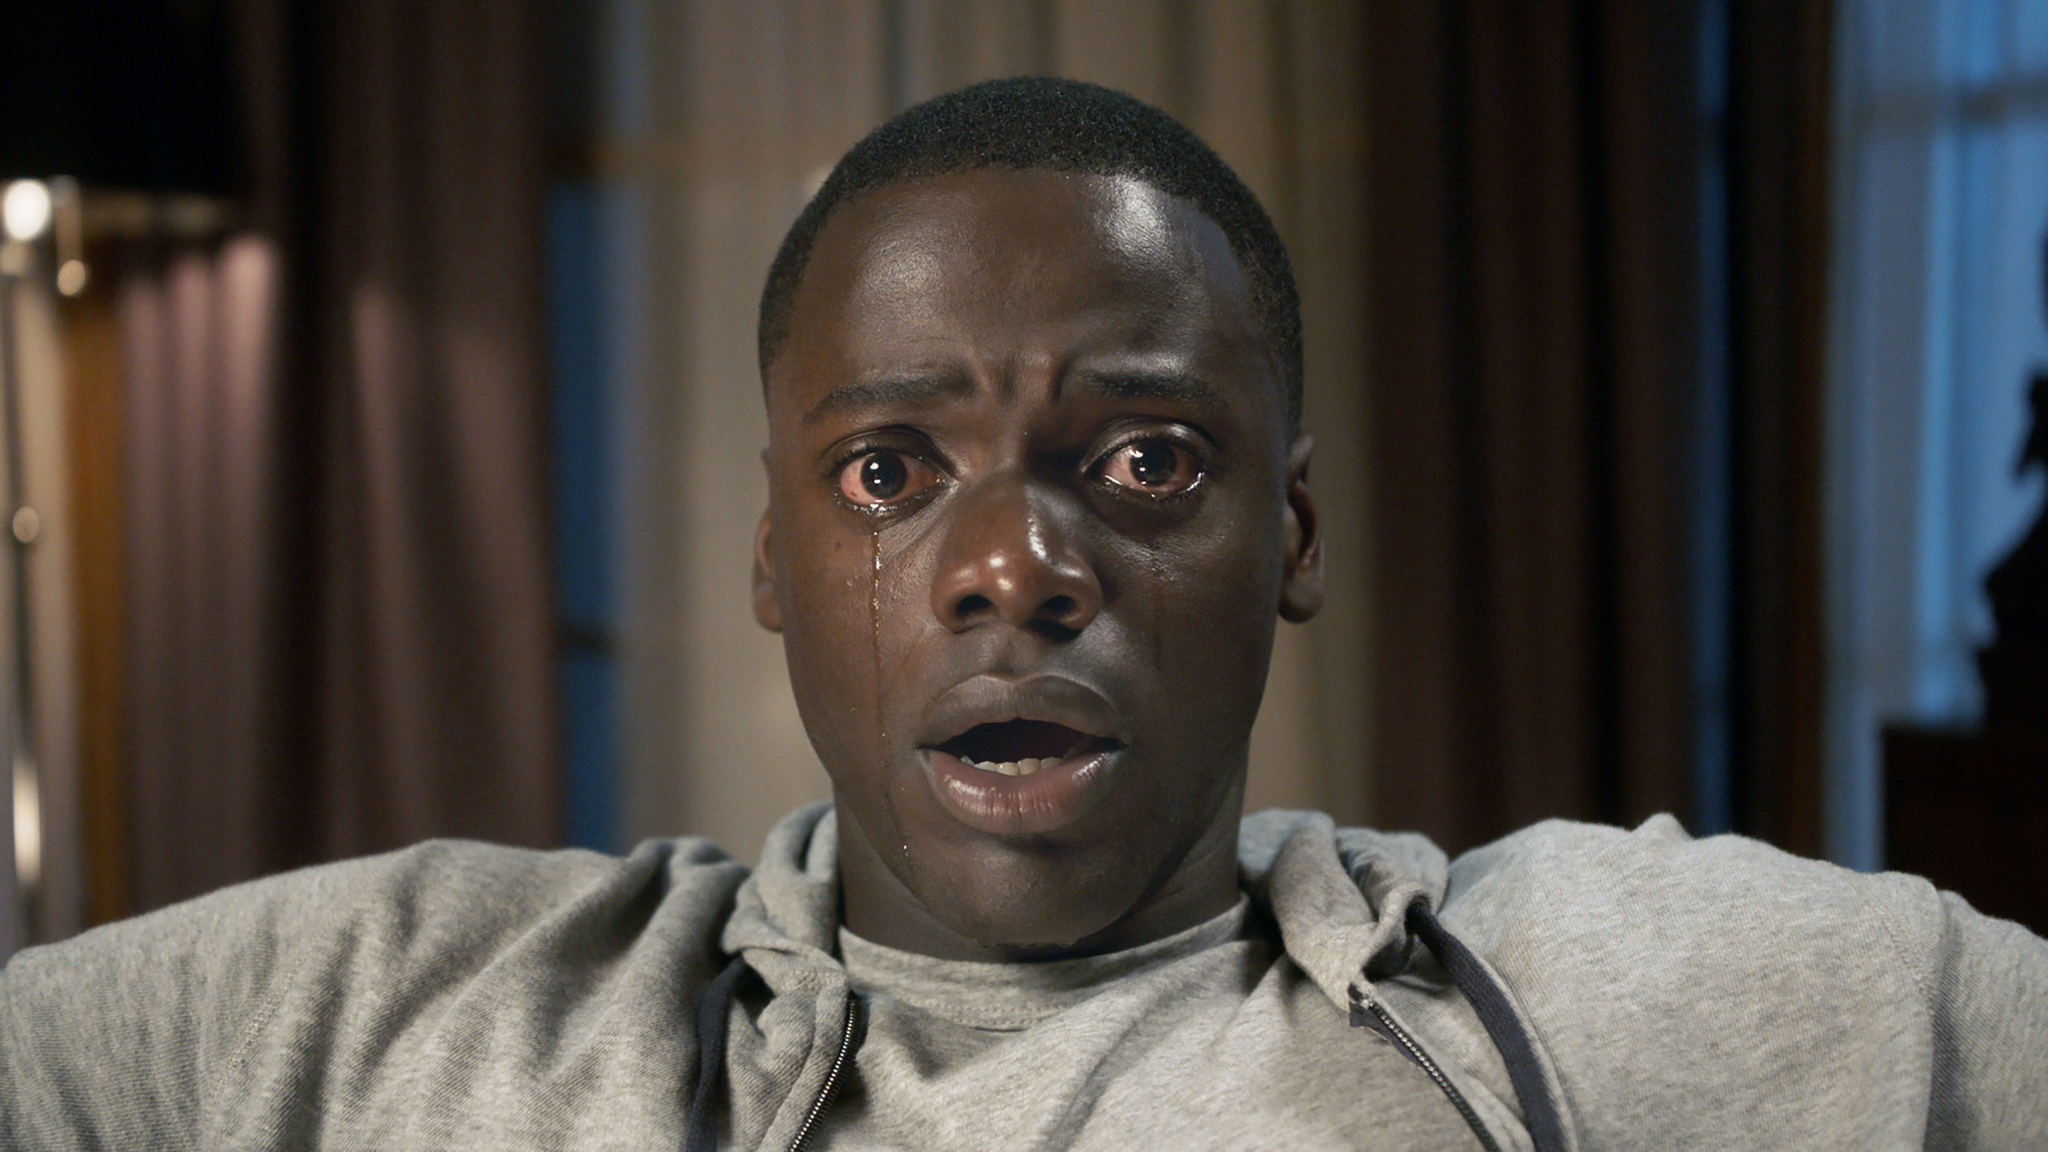 Daniel Kaluuya as Chris Washington in “Get Out,” a speculative thriller from Blumhouse (producers of “The Visit,” “Insidious” series and “The Gift”) and the mind of Jordan Peele, when a young African-American man visits his white girlfriend’s family estate, he becomes ensnared in a more sinister real reason for the invitation. (Universal Pictures via AP)